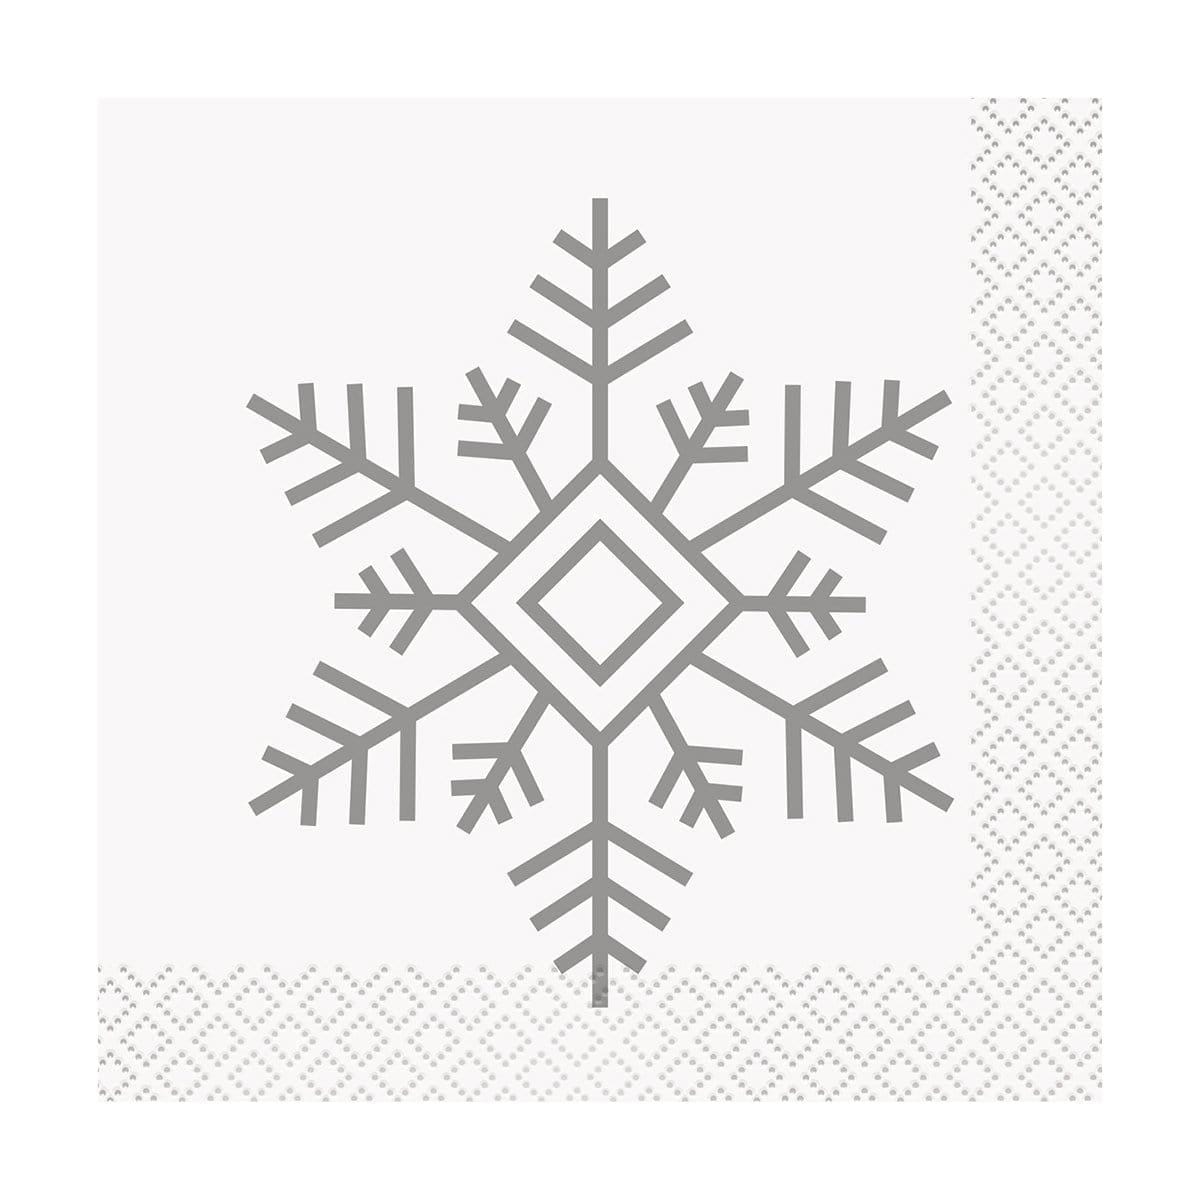 Buy Christmas Holiday Snowflakes - Bev. Napkins 16/pkg sold at Party Expert